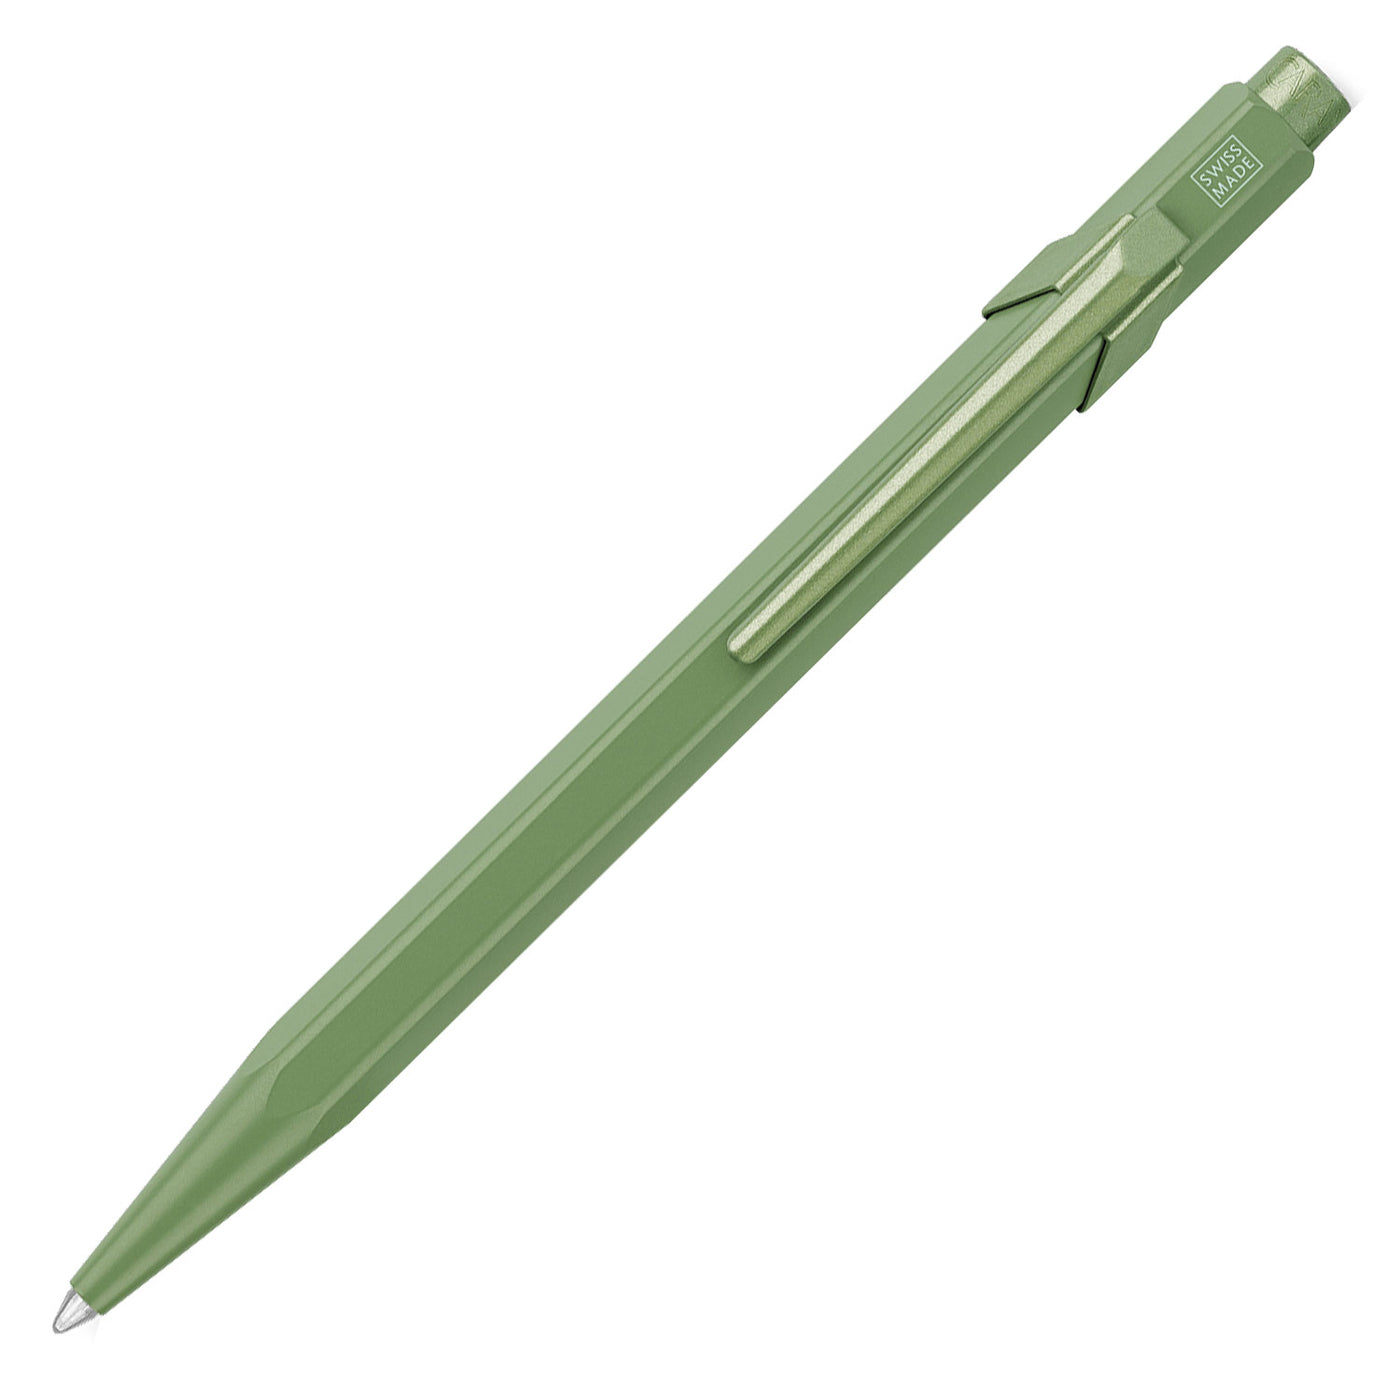 Caran d'Ache 849 Claim Your Style Ball Pen - Clay Green (Limited Edition) 1